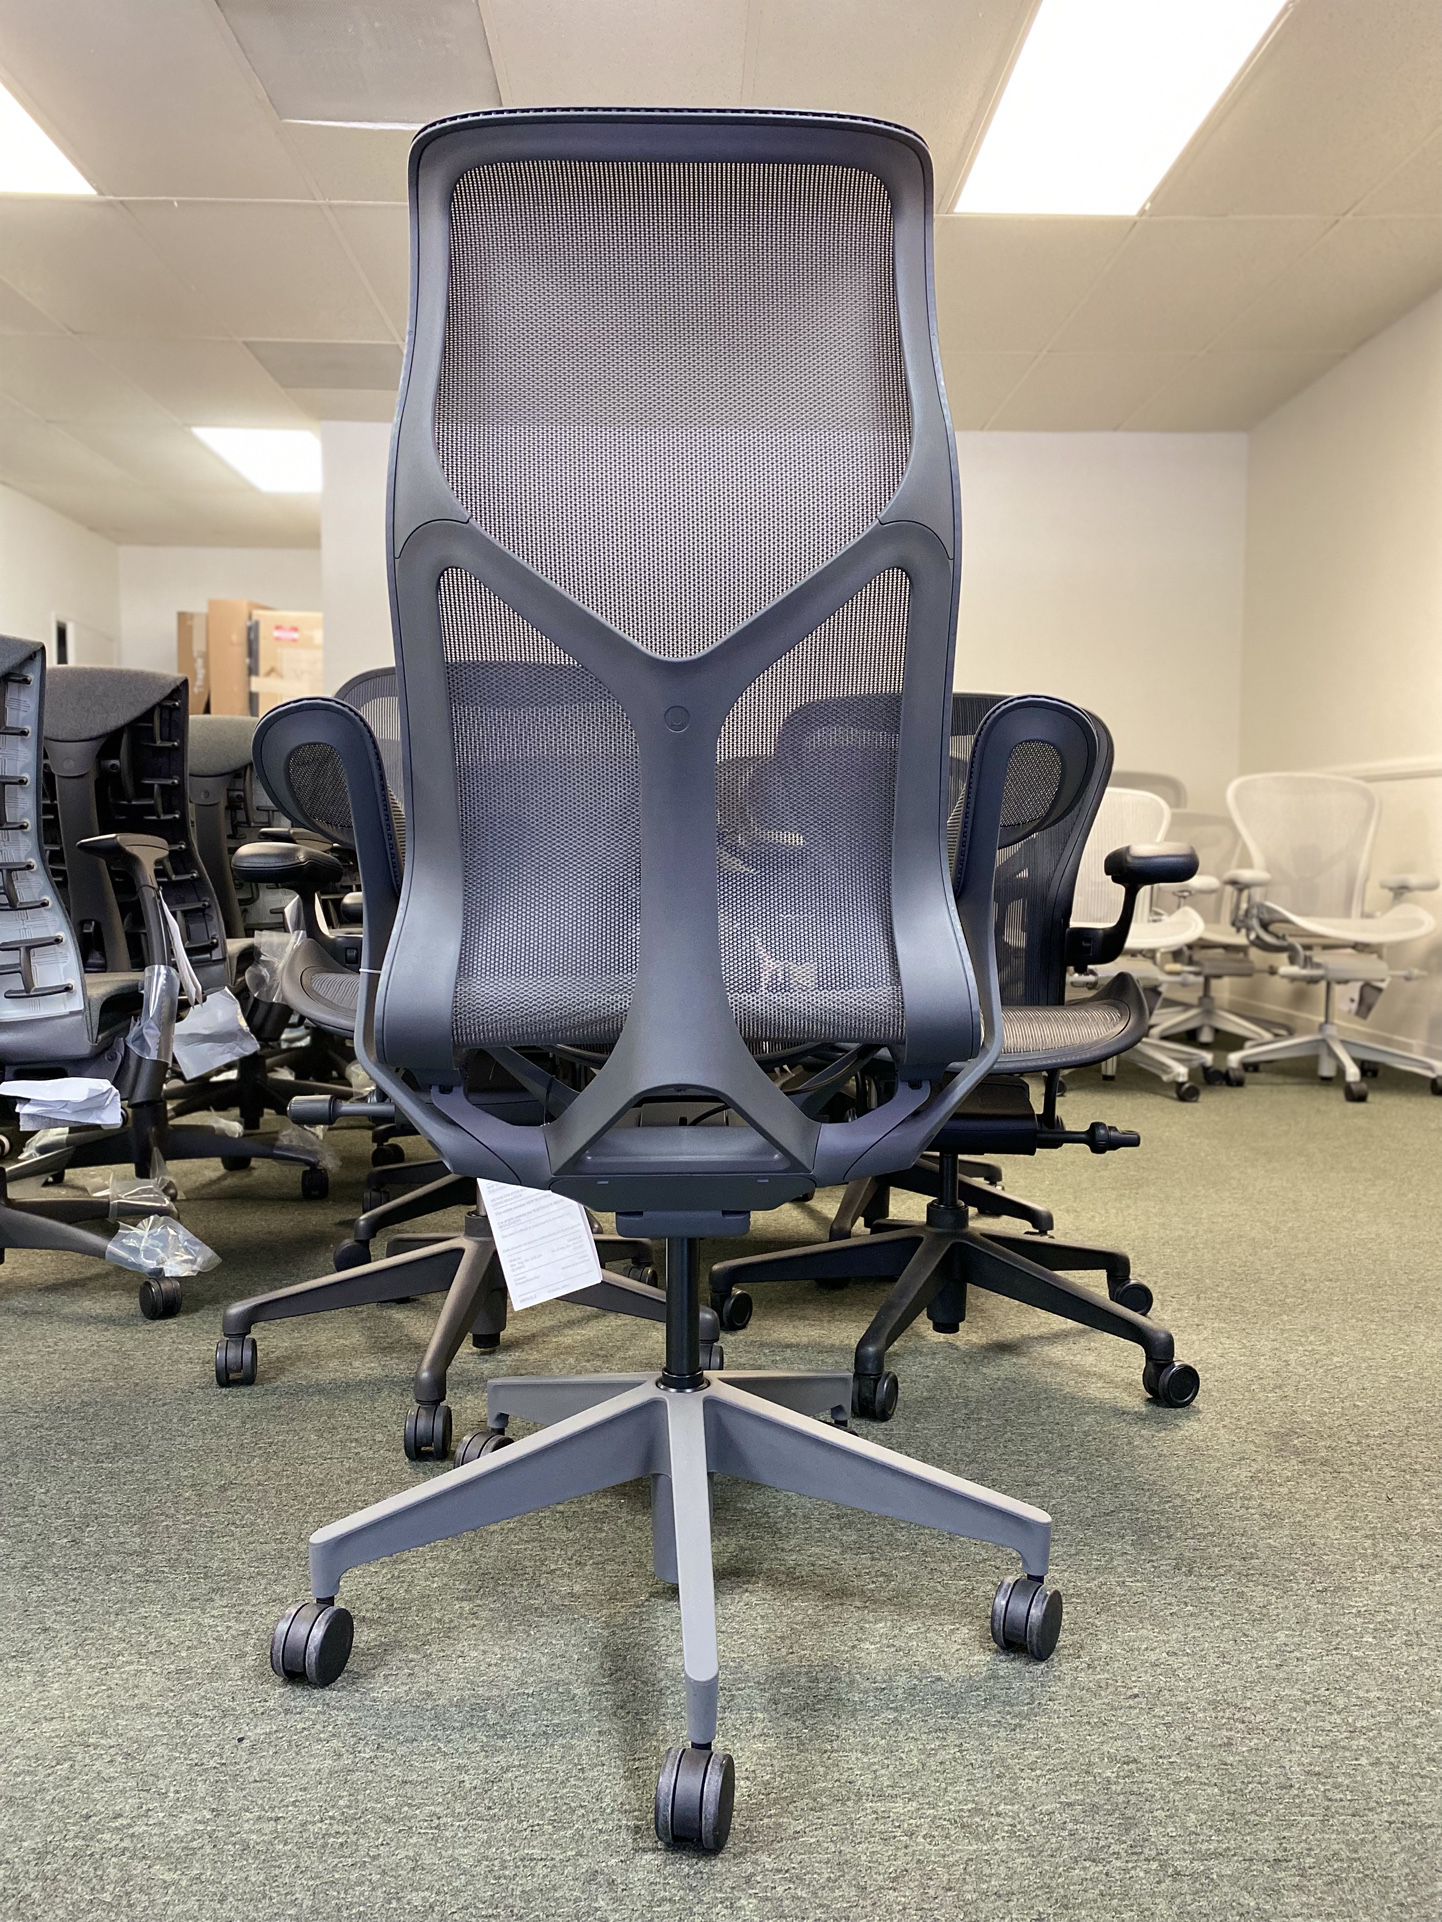 🔥50% OFF BRAND NEW HERMAN MILLER COSM CHAIR HIGH BACK FULLY LOADED 2023 🔥 $995.